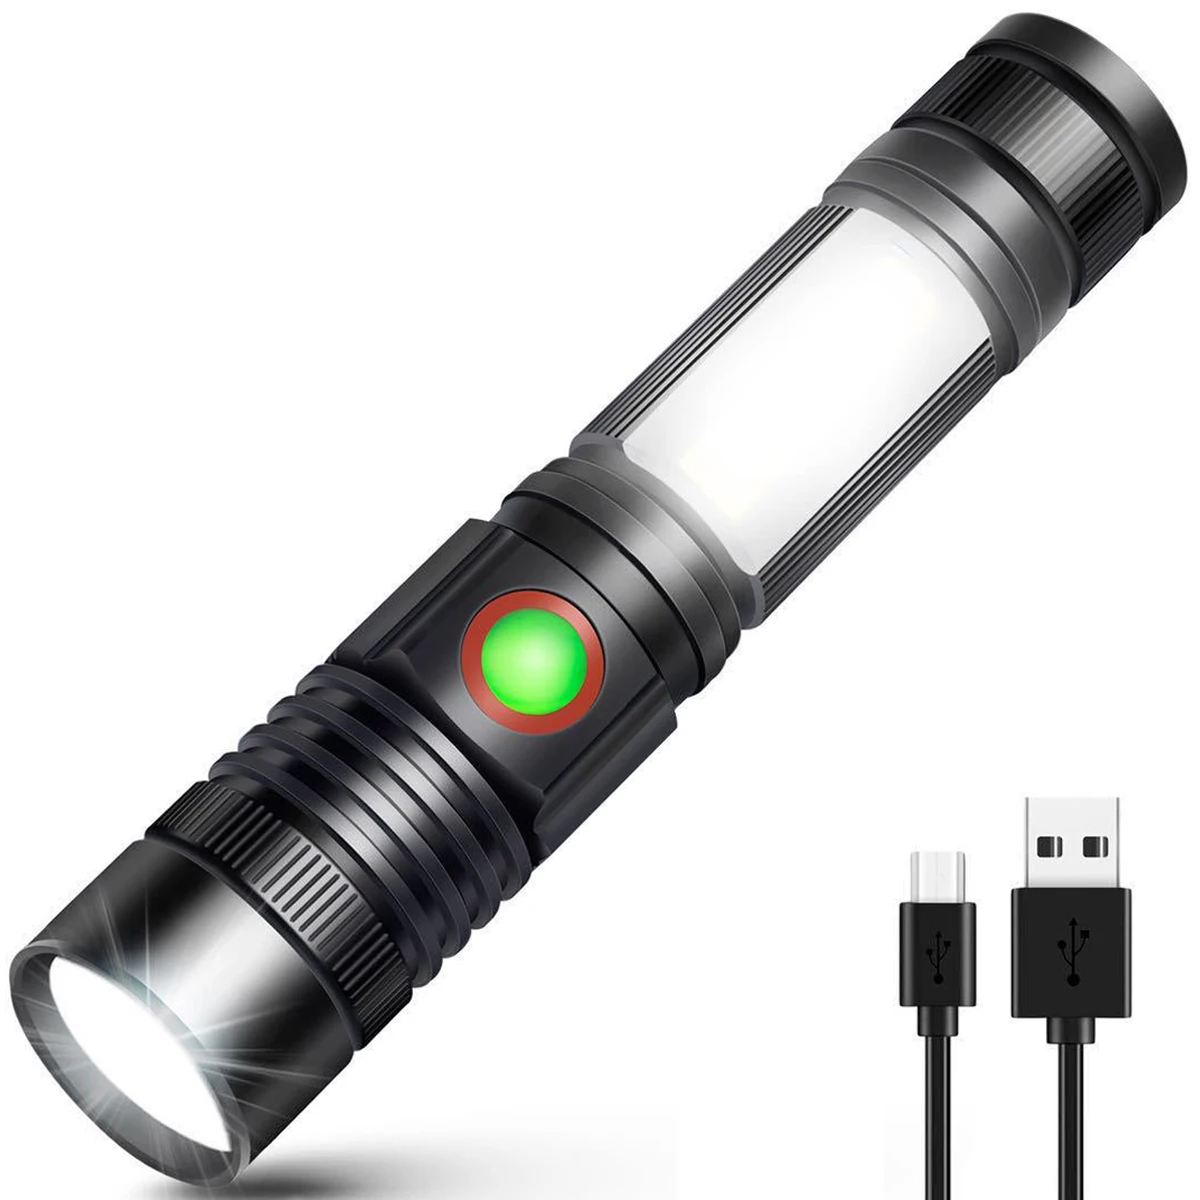 

LED Flashlight Outdoor Camping Torchlight USB Chargeable Flash Light Waterproof LED Torch Lamp for Camping Hiking